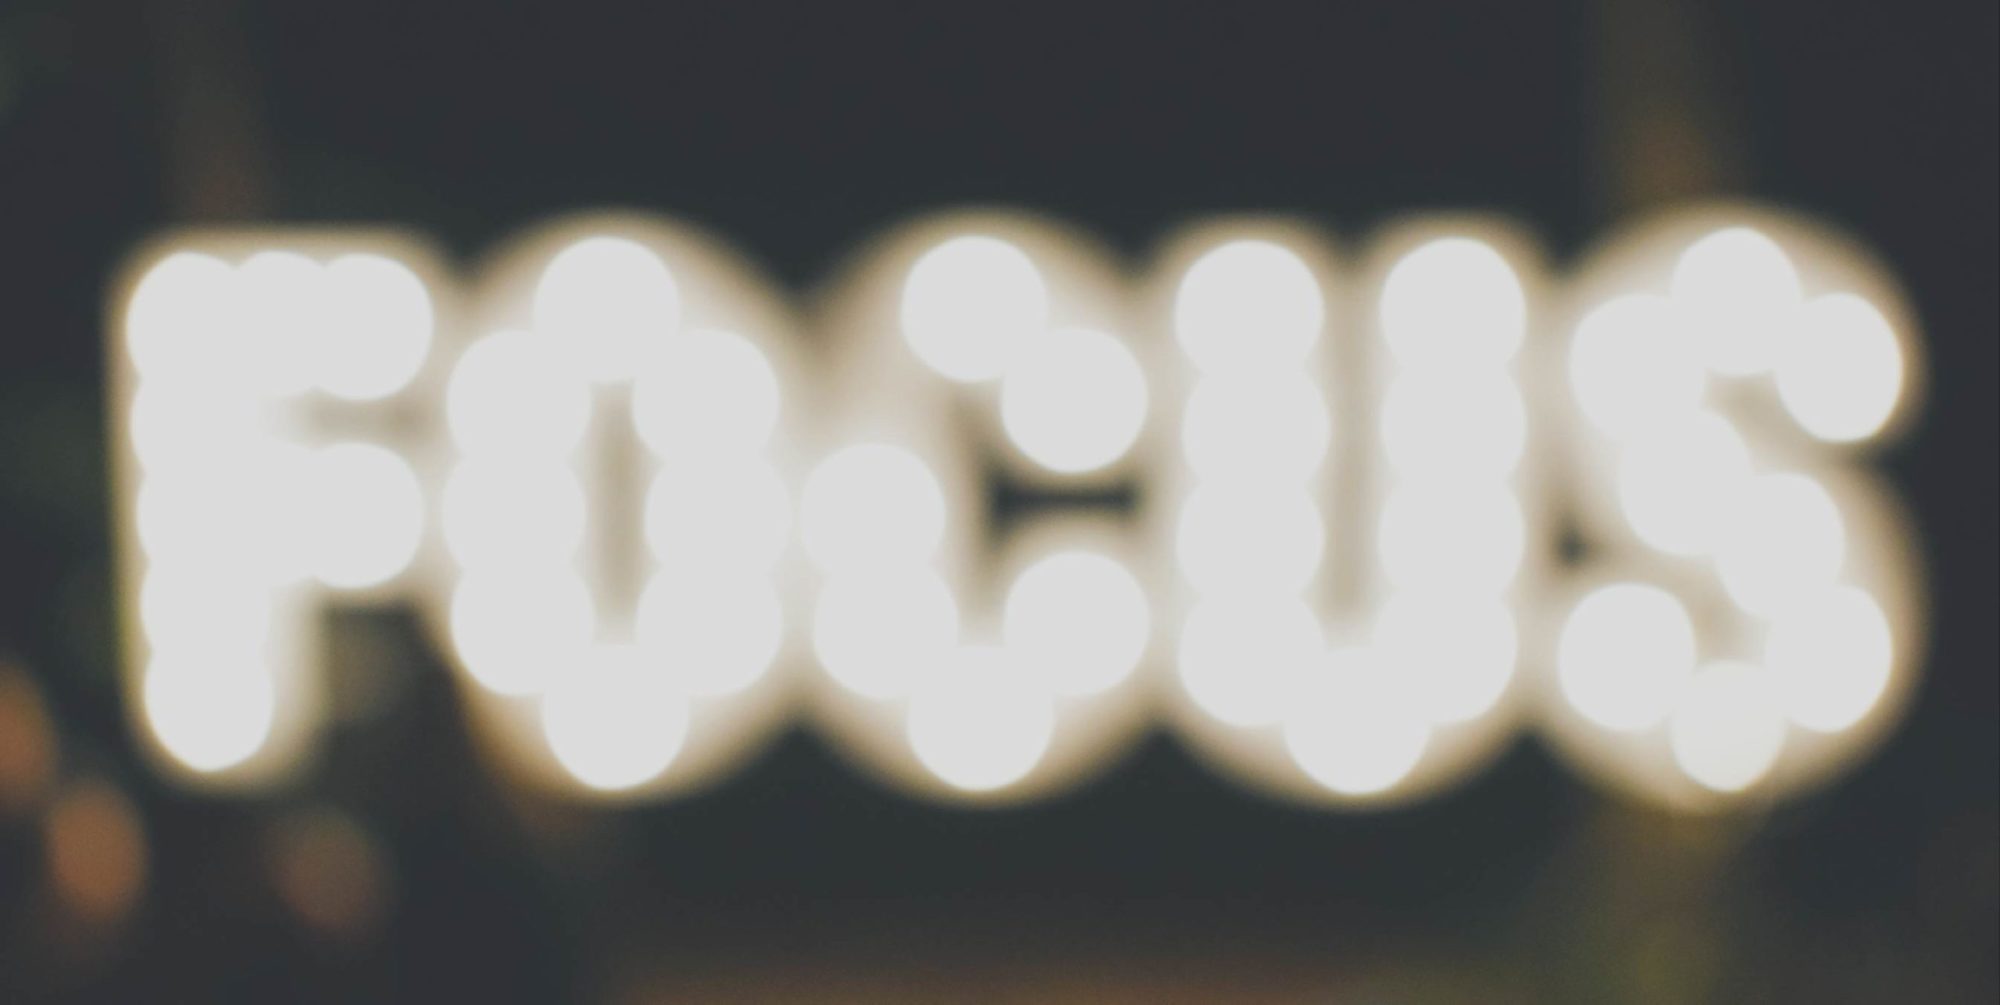 A photo of a lighted sign that reads "FOCUS", and is slightly out of focus.